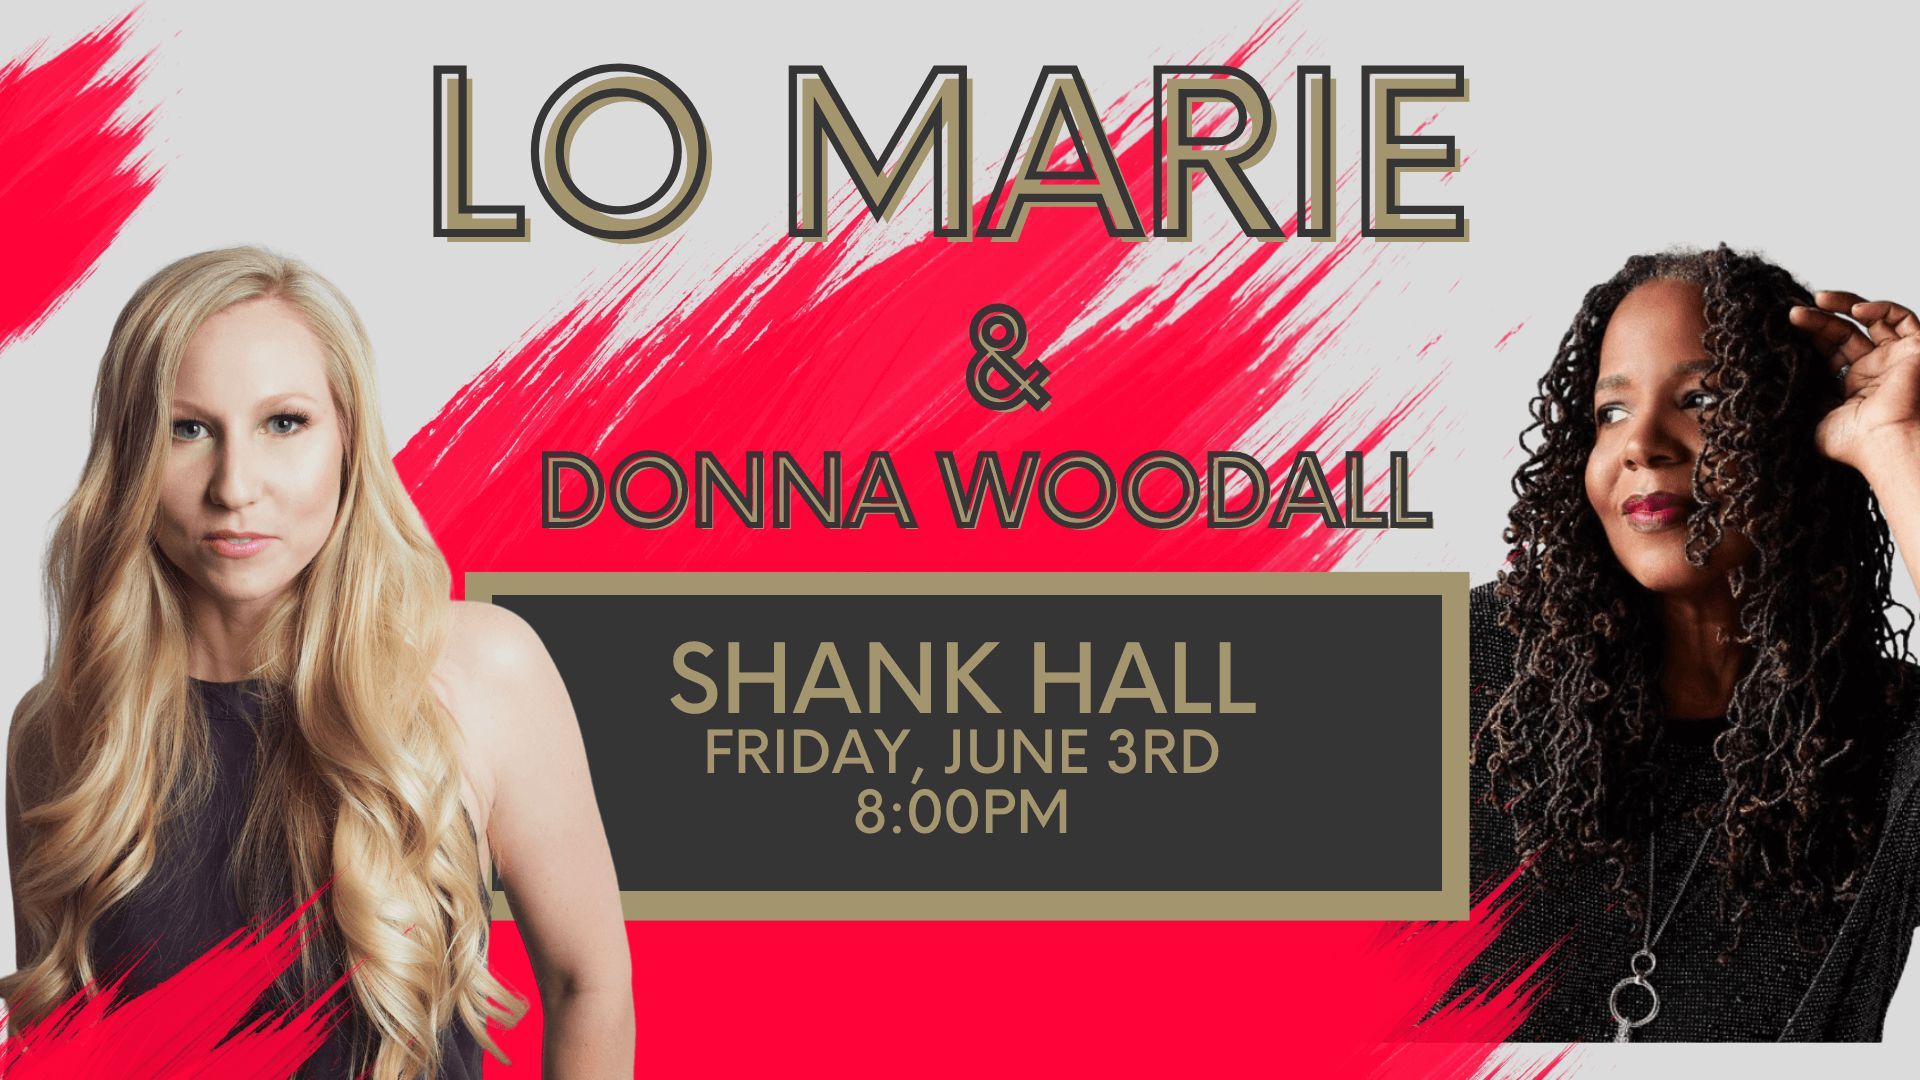 Lo Marie at Shank Hall June 3rd at 8 pm with Donna Woodall, Milwaukee, Wisconsin, United States